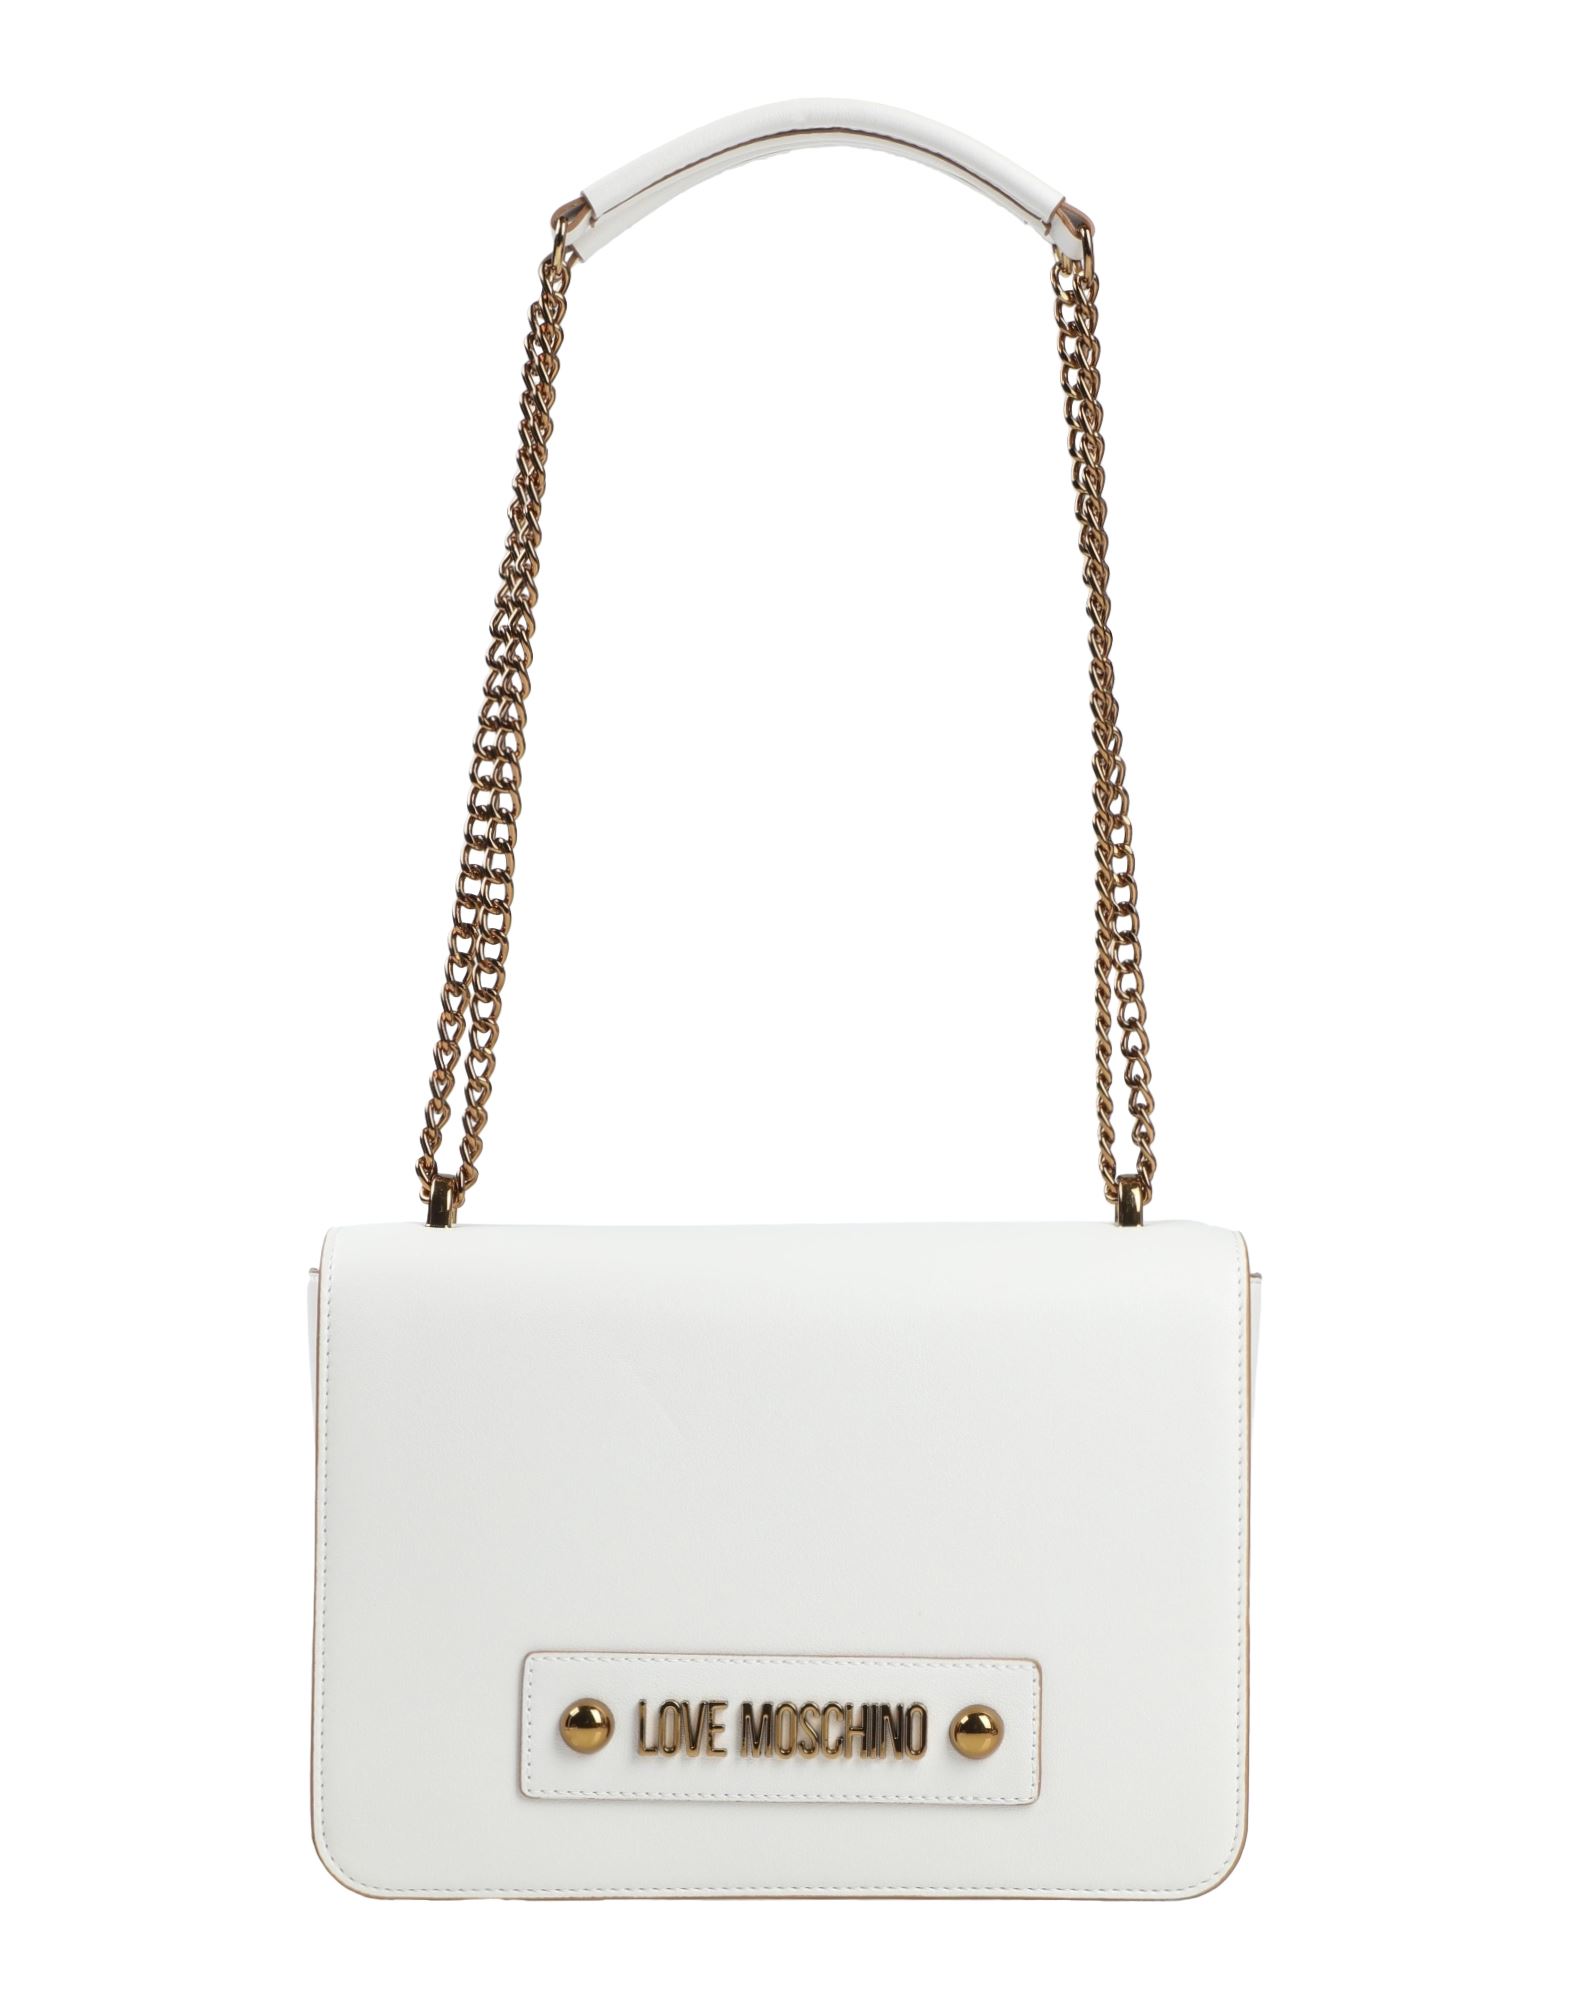 LOVE MOSCHINO Shoulder bags - Item 45553178